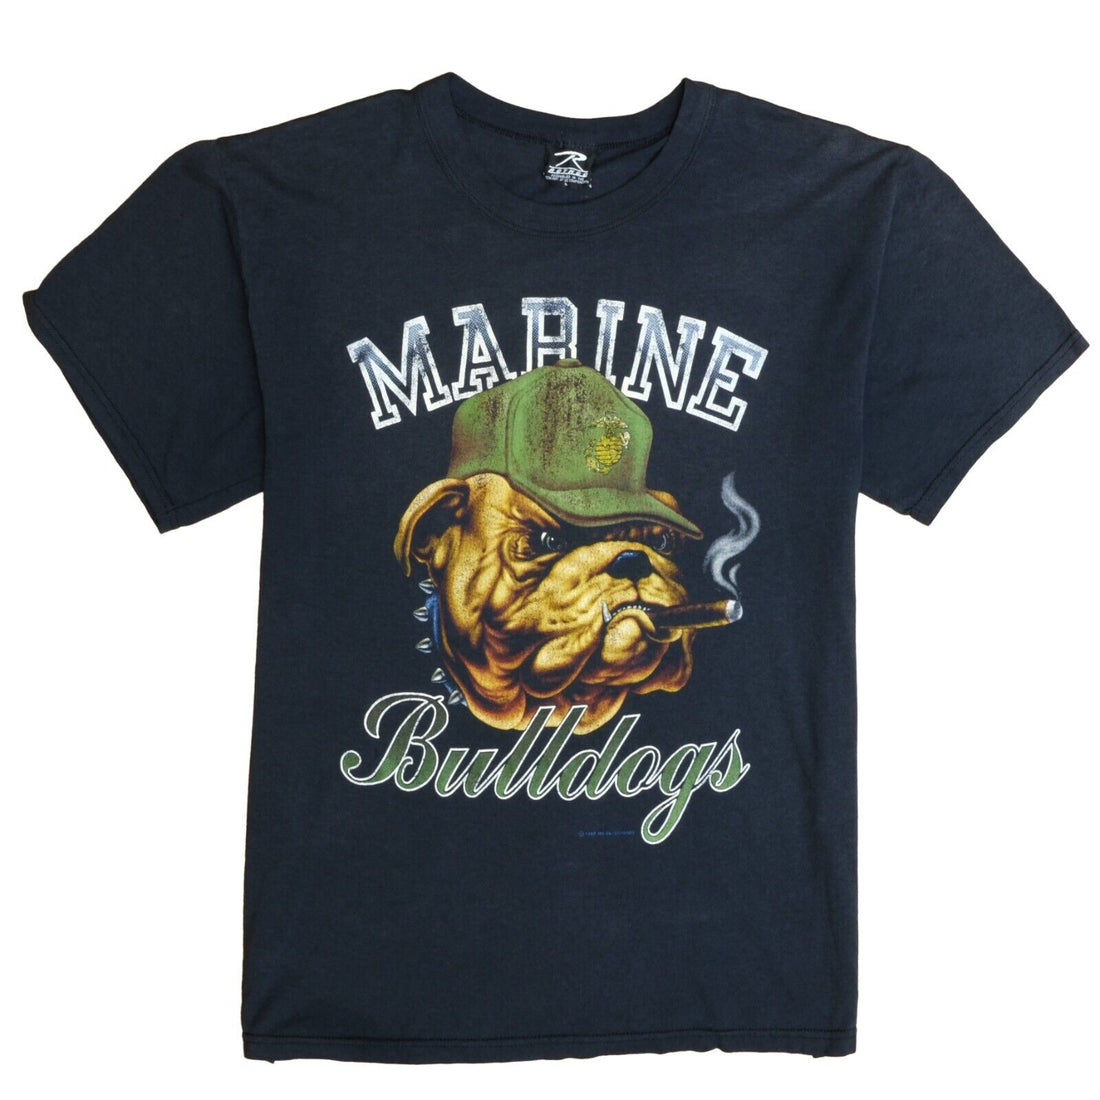 Vintage Marine Bulldogs T-Shirt Size Large Military Army 1989 80s